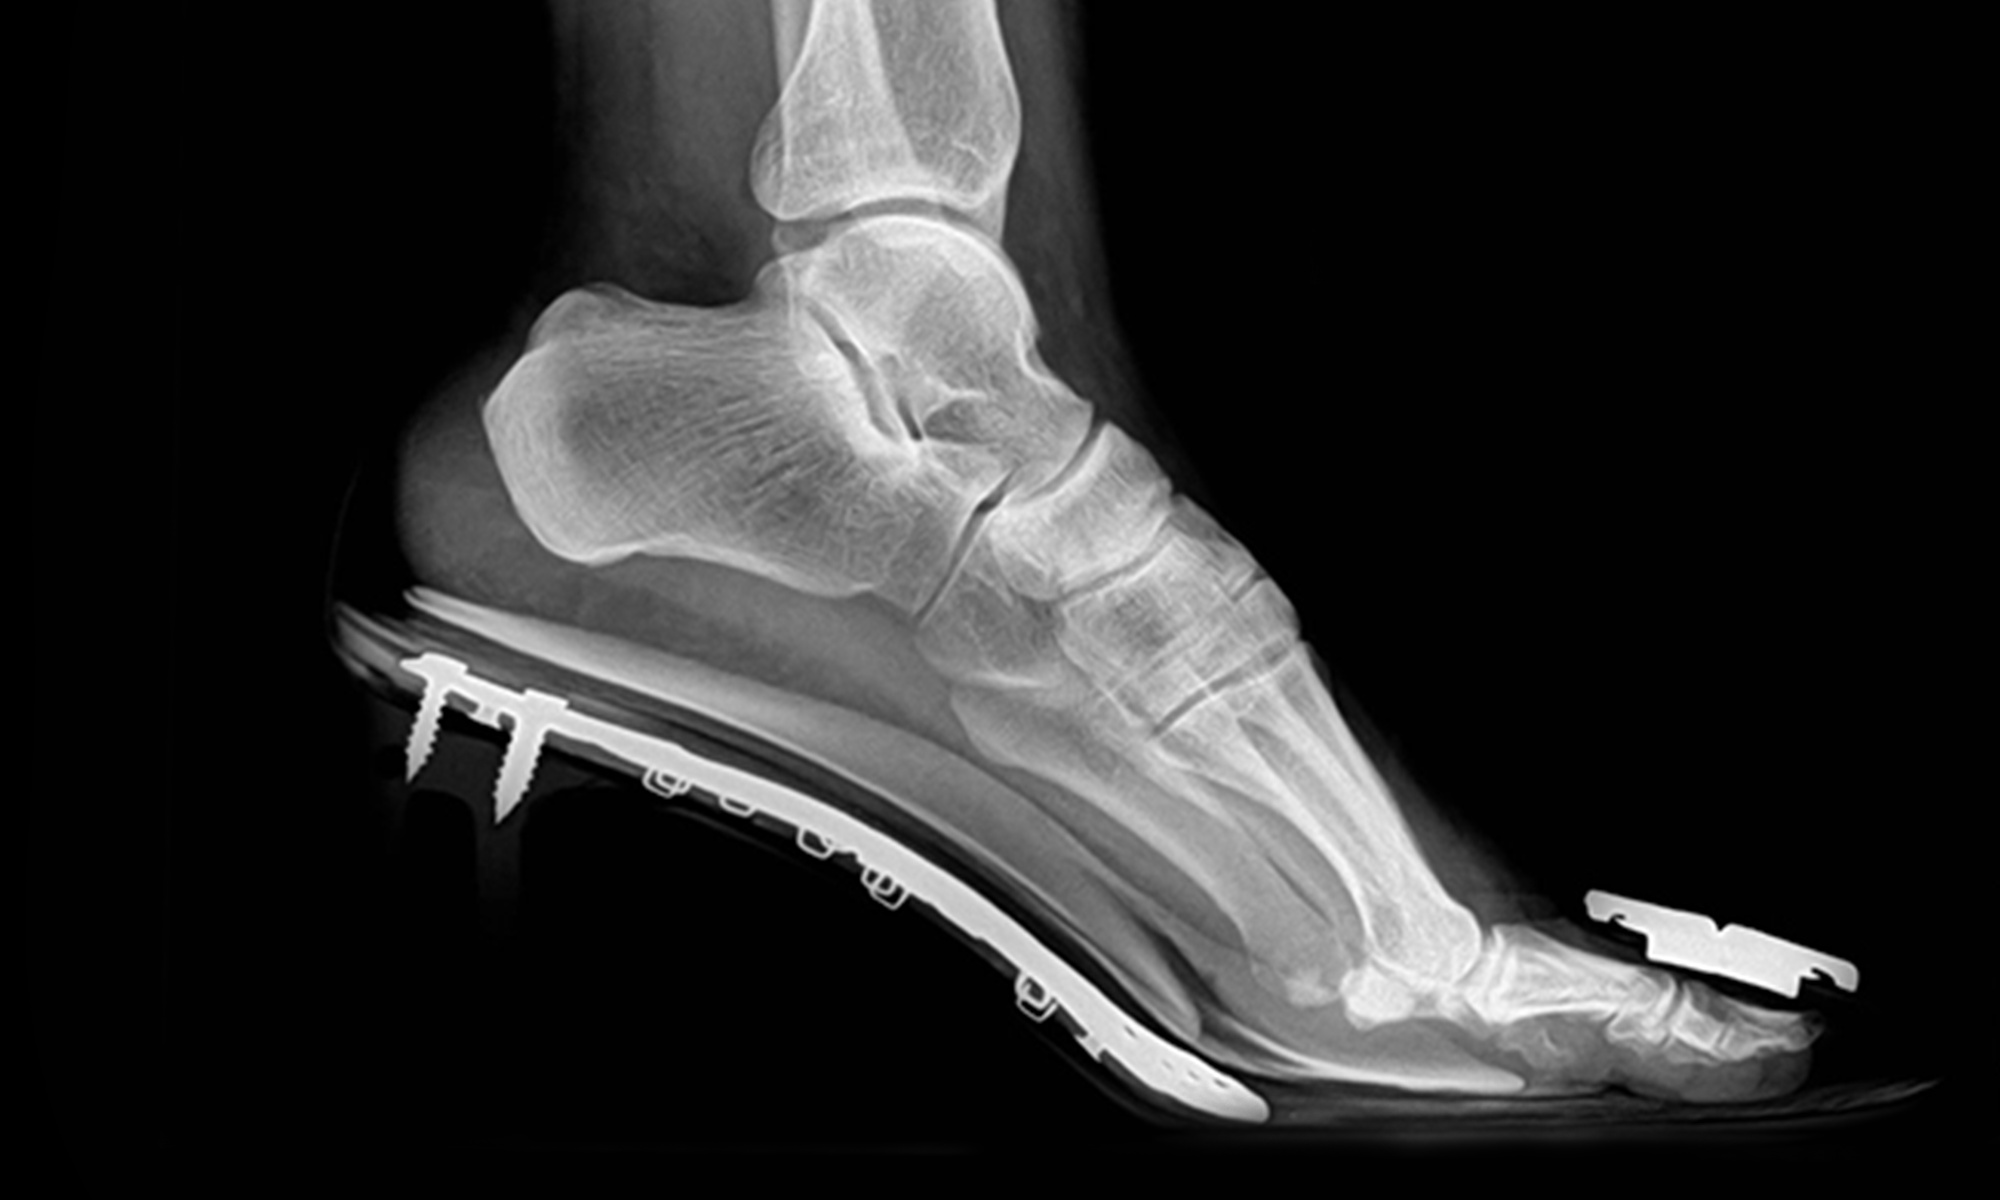 X-ray of a Foot on E'MAR Heels